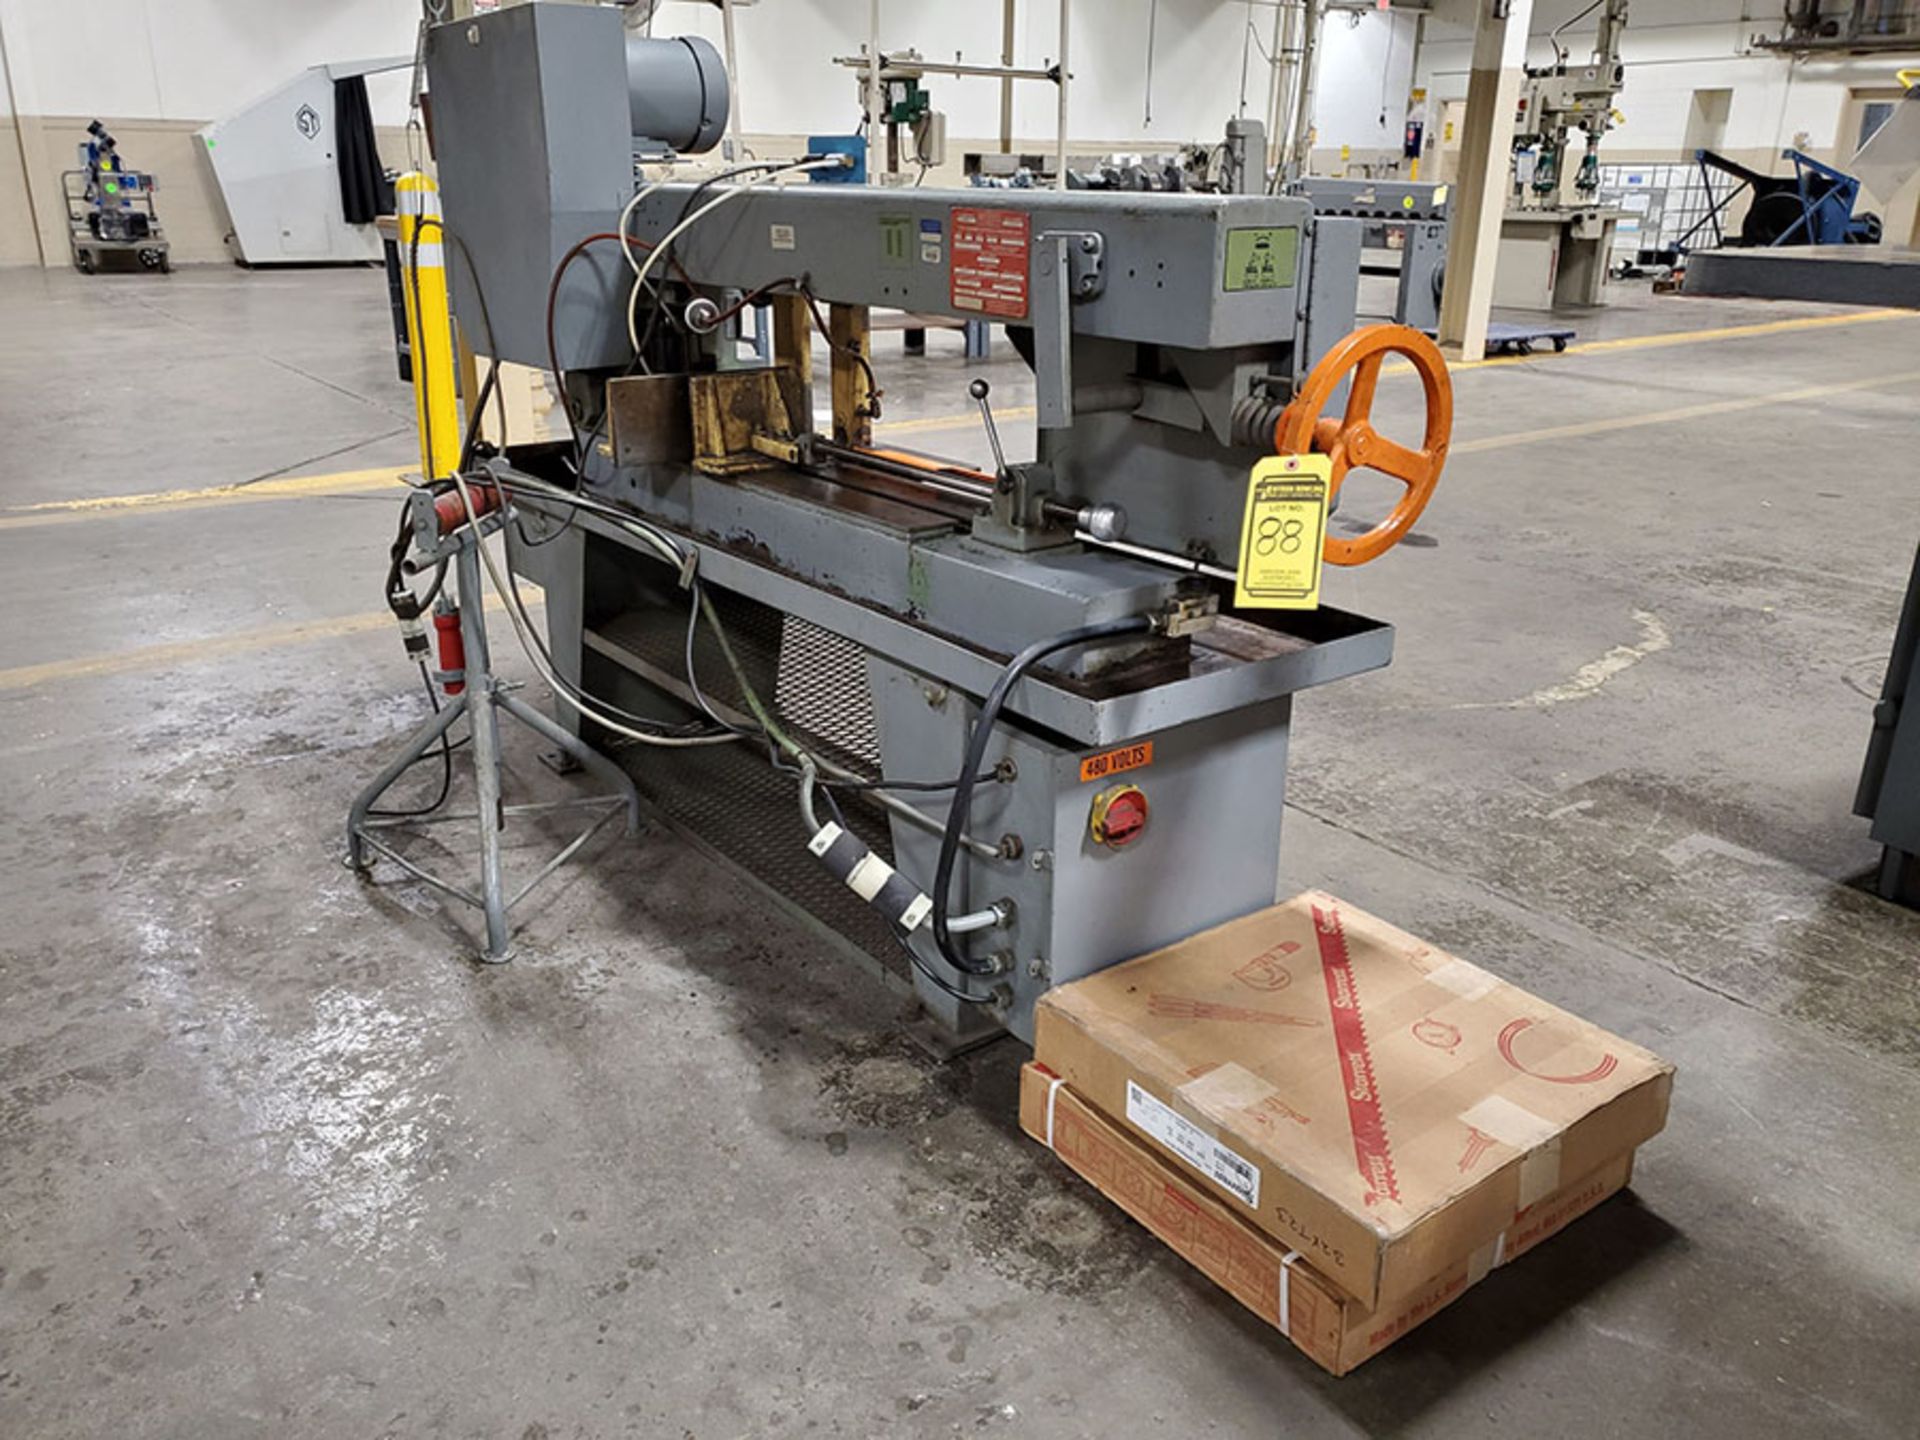 DO-ALL MODEL C-916 BANDSAW METAL CUTTING; MODEL C-915, S/N 438-882018, 3-PHASE, 3.0 NORMAL AMPS, - Image 7 of 9